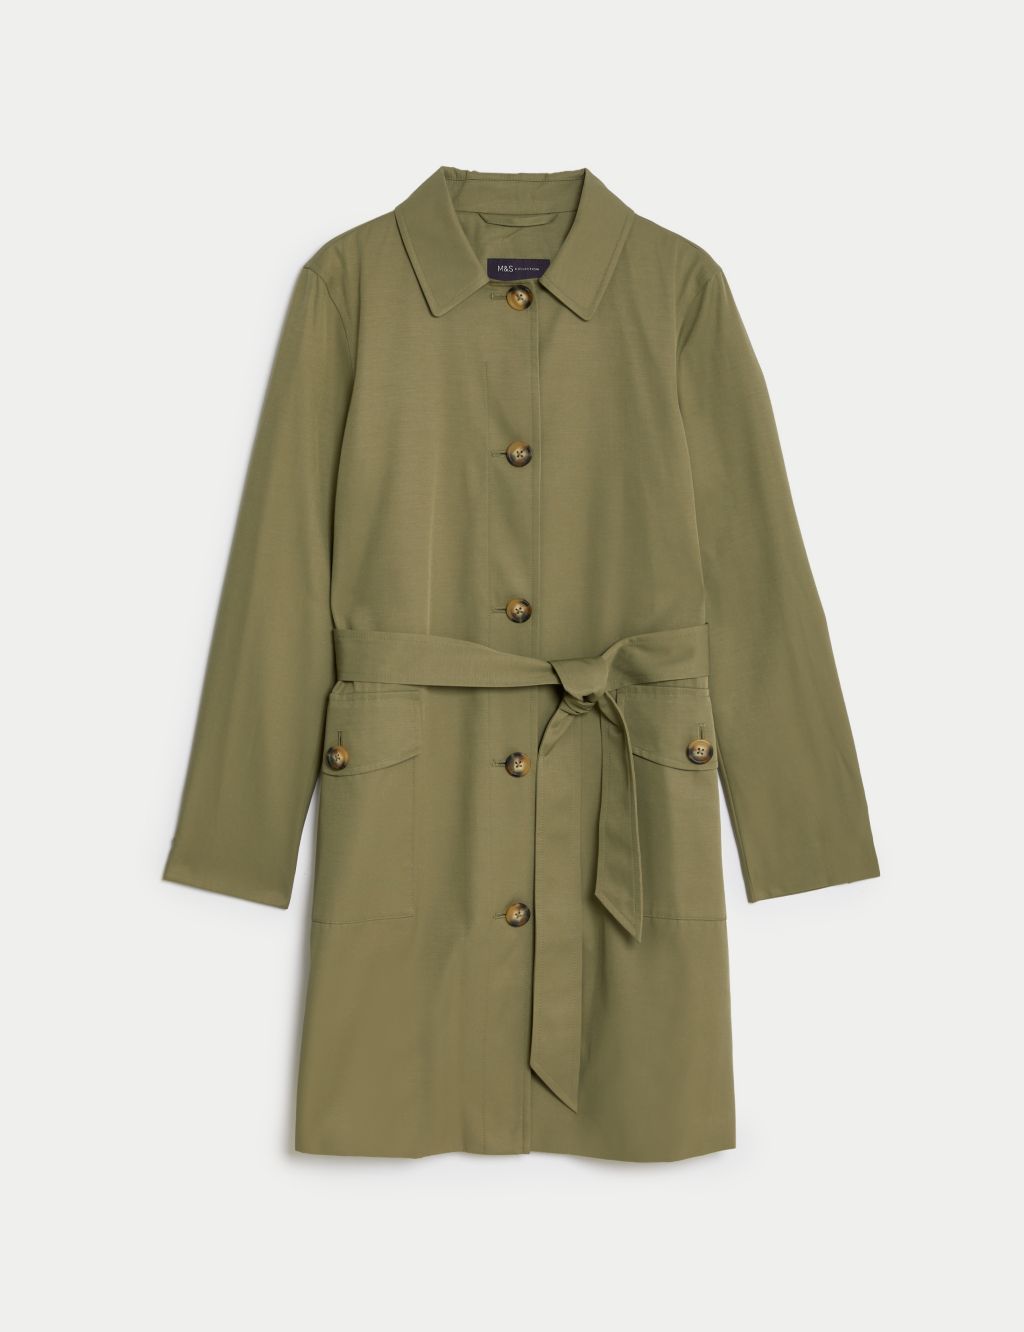 Stormwear™ Belted Single Breasted Trench Coat image 2